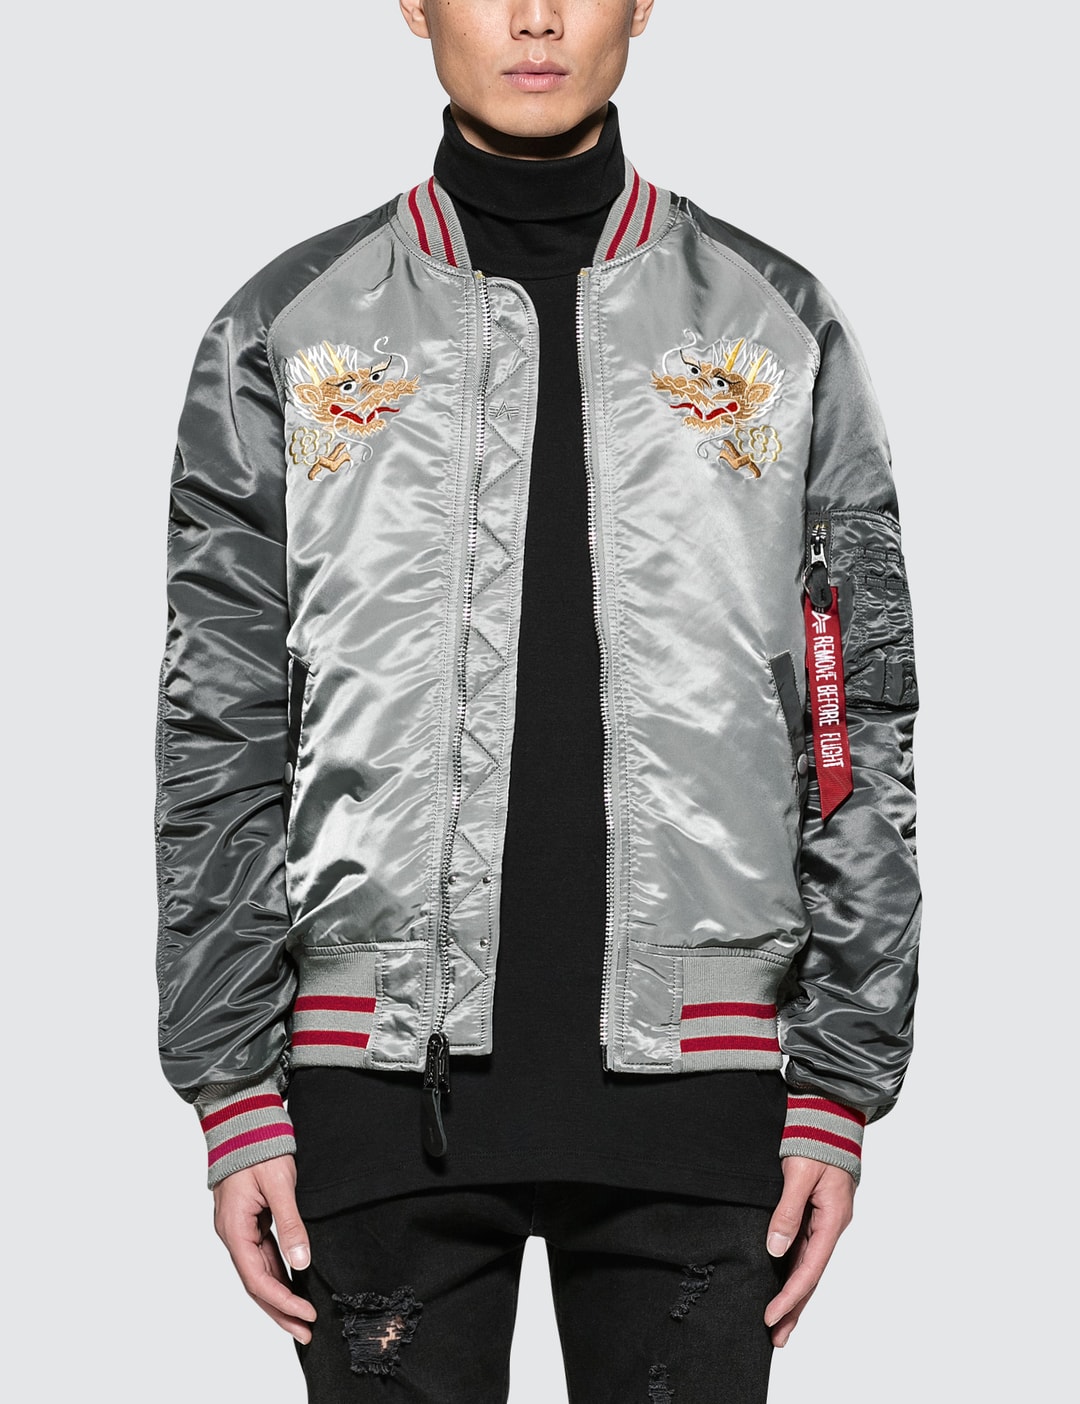 Alpha Industries - MA-1 Dragon and by HBX - Globally Jacket Hypebeast Souvenir Fashion Lifestyle Curated Double |